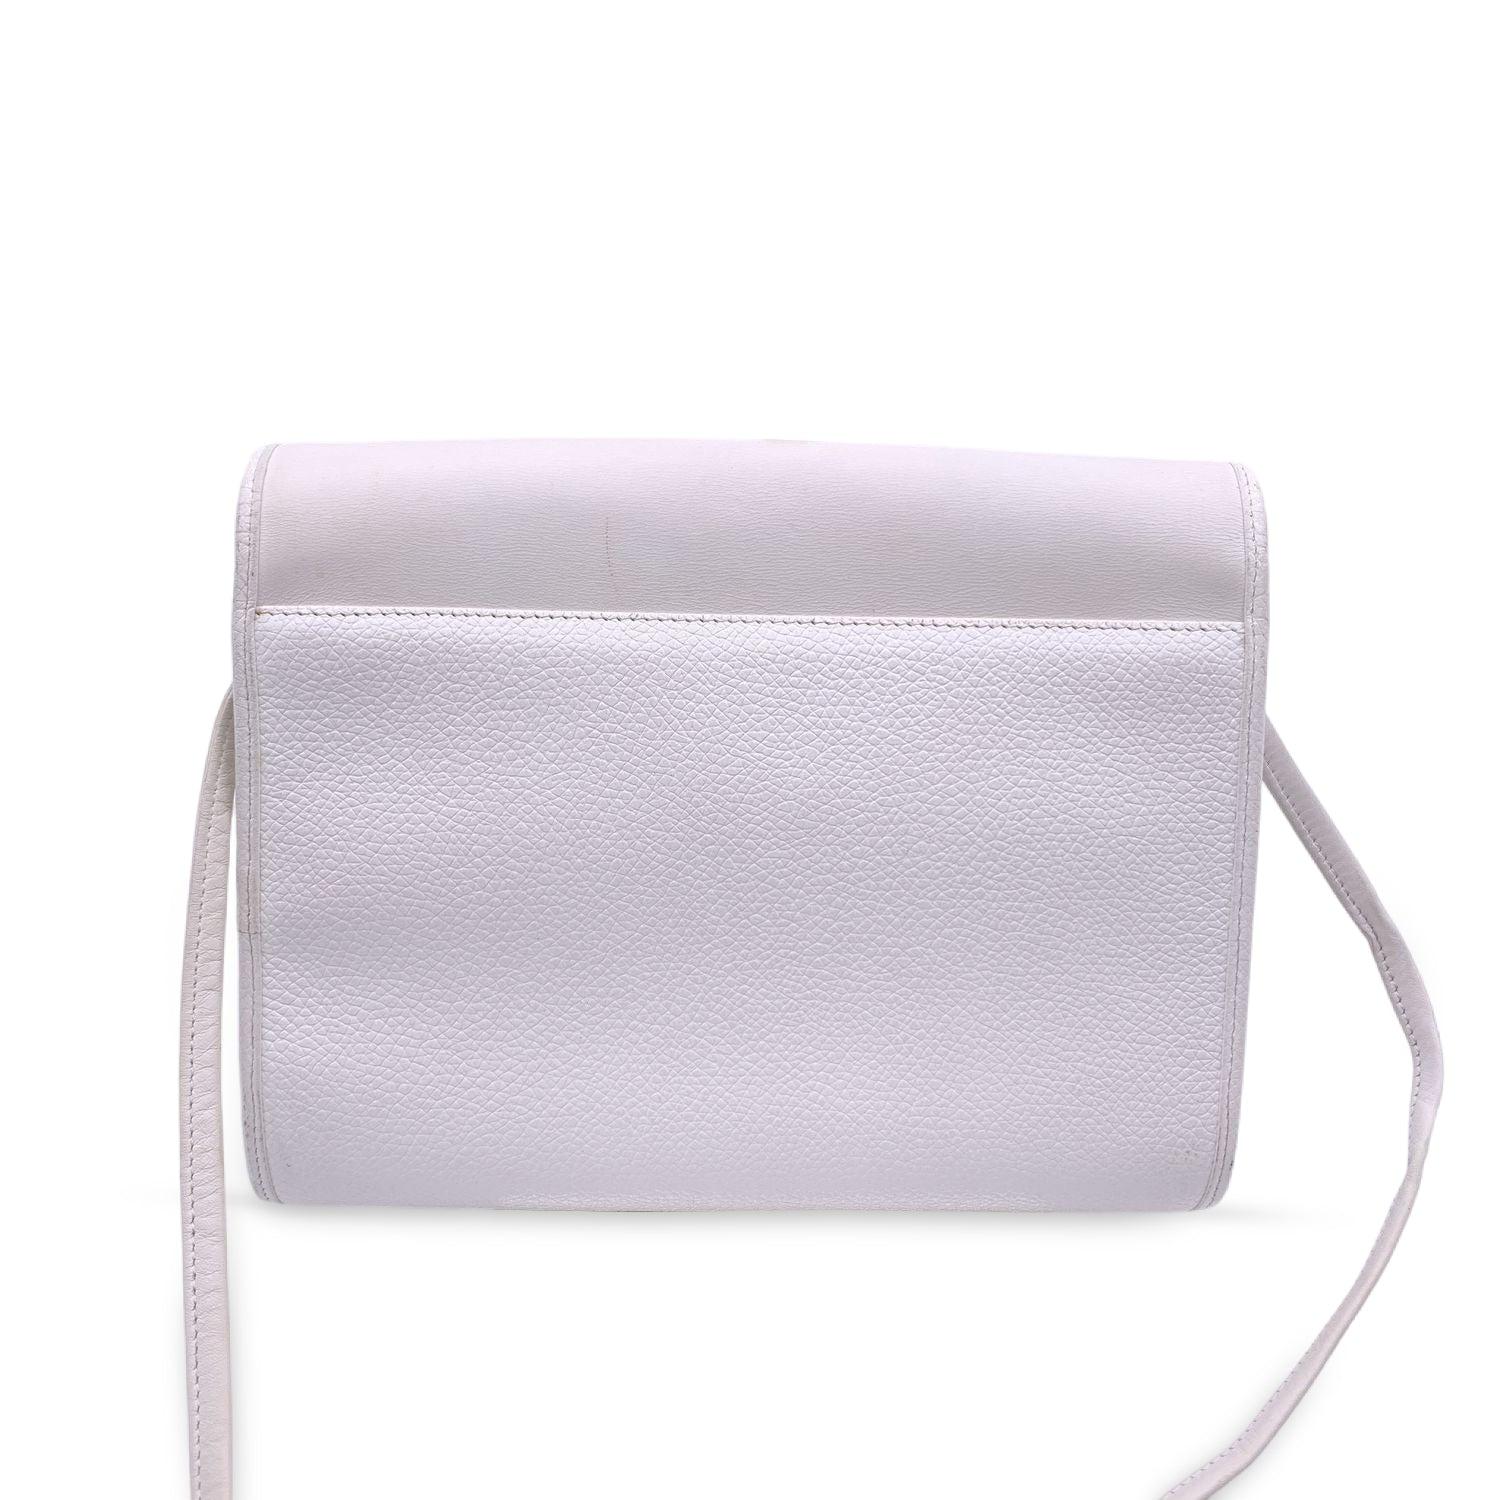 Christian Dior Vintage White Leather Crossbody Messenger Bag In Excellent Condition For Sale In Rome, Rome